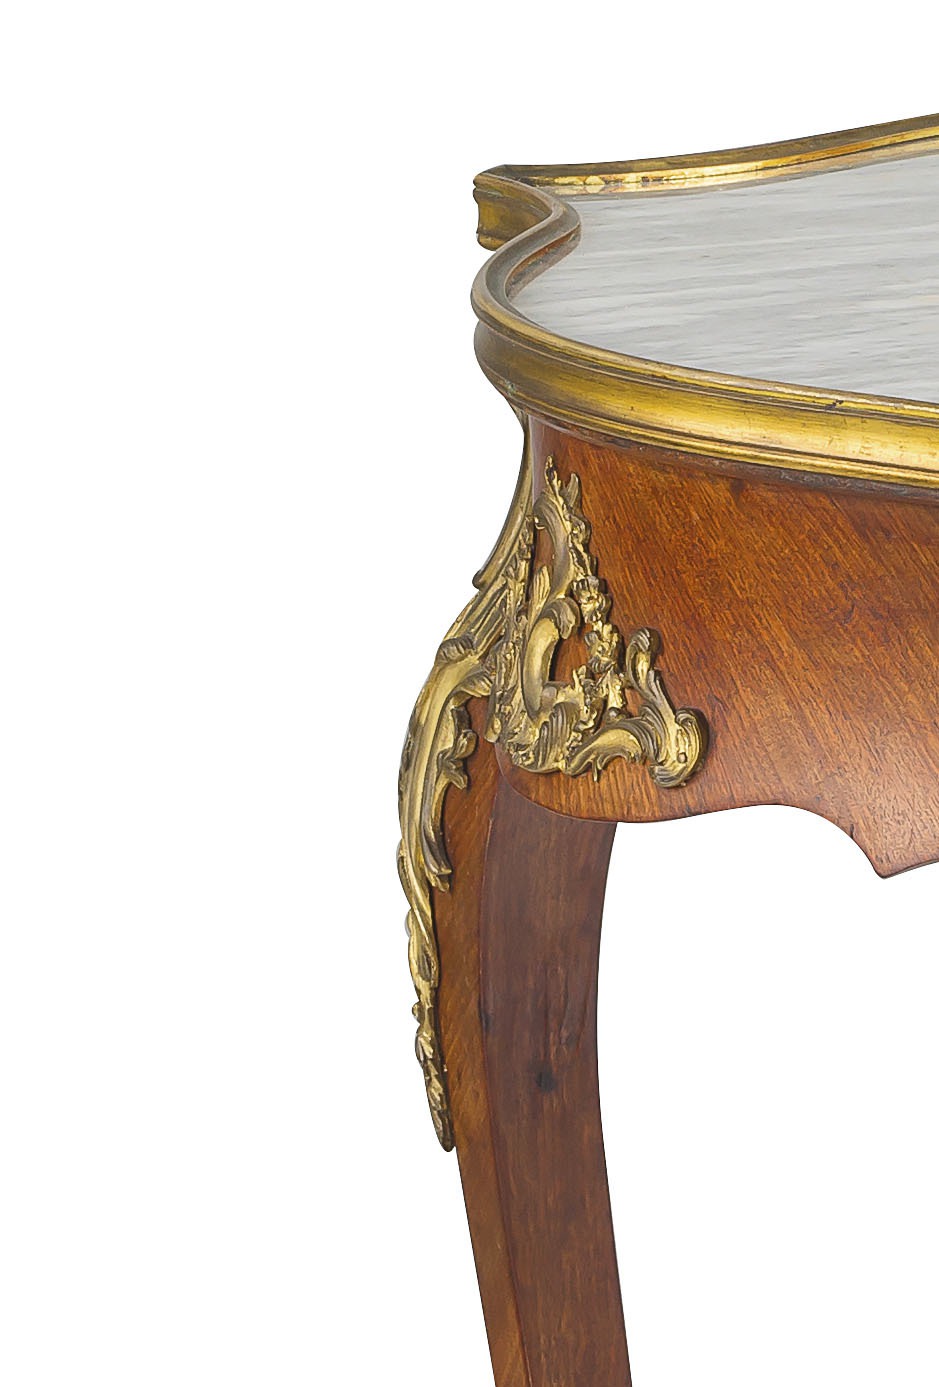 A Louis XVI style marble-topped, kingwood and gilt-metal-mounted occasional table, late 19th/early 20th century